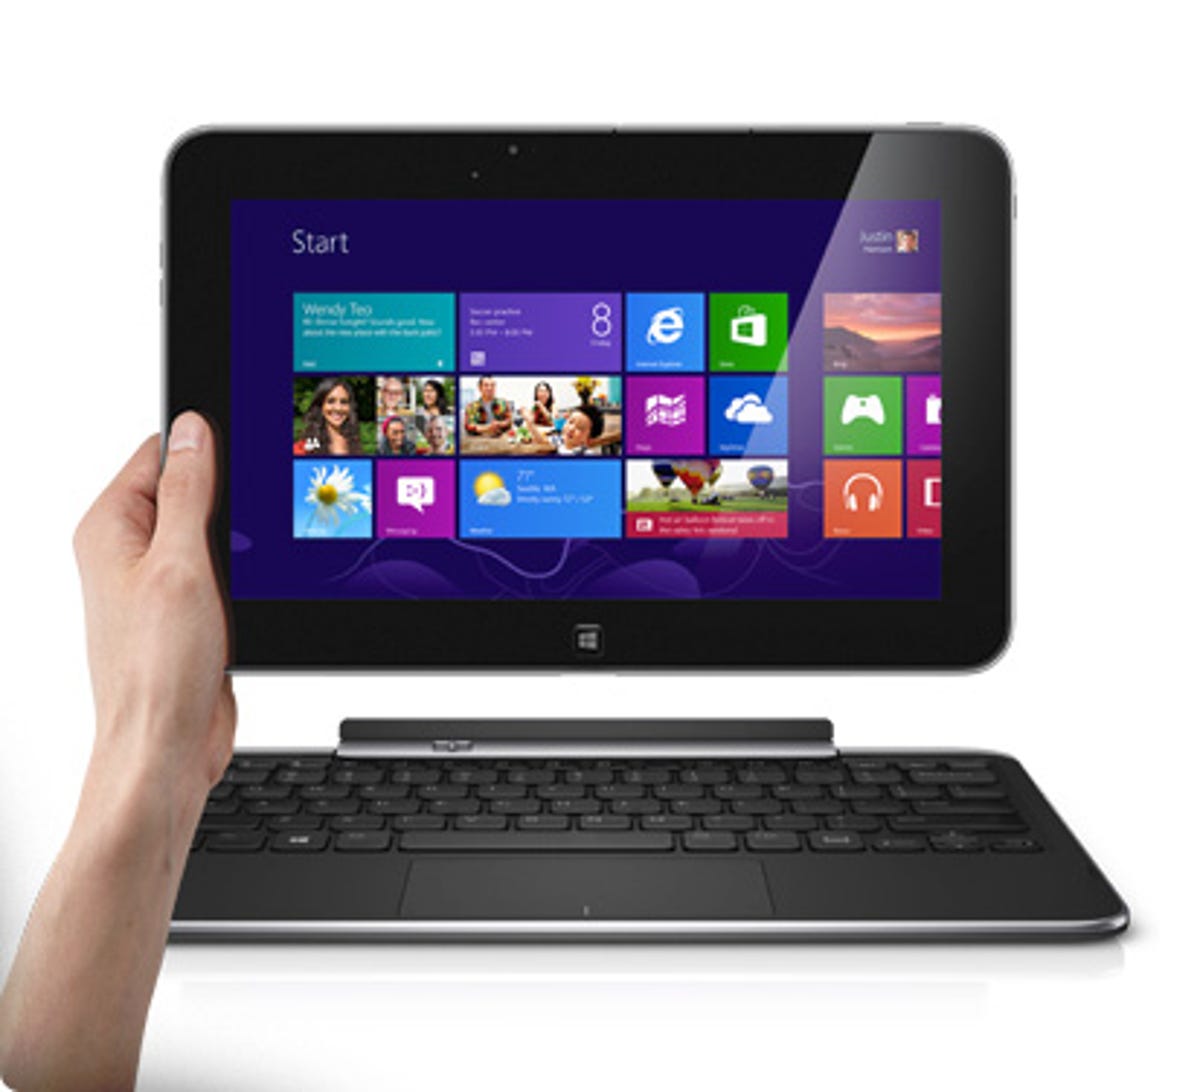 Dell's XPS 10 Windows RT tablet, shown with keyboard dock, is now $299.99, reduced from 449.99